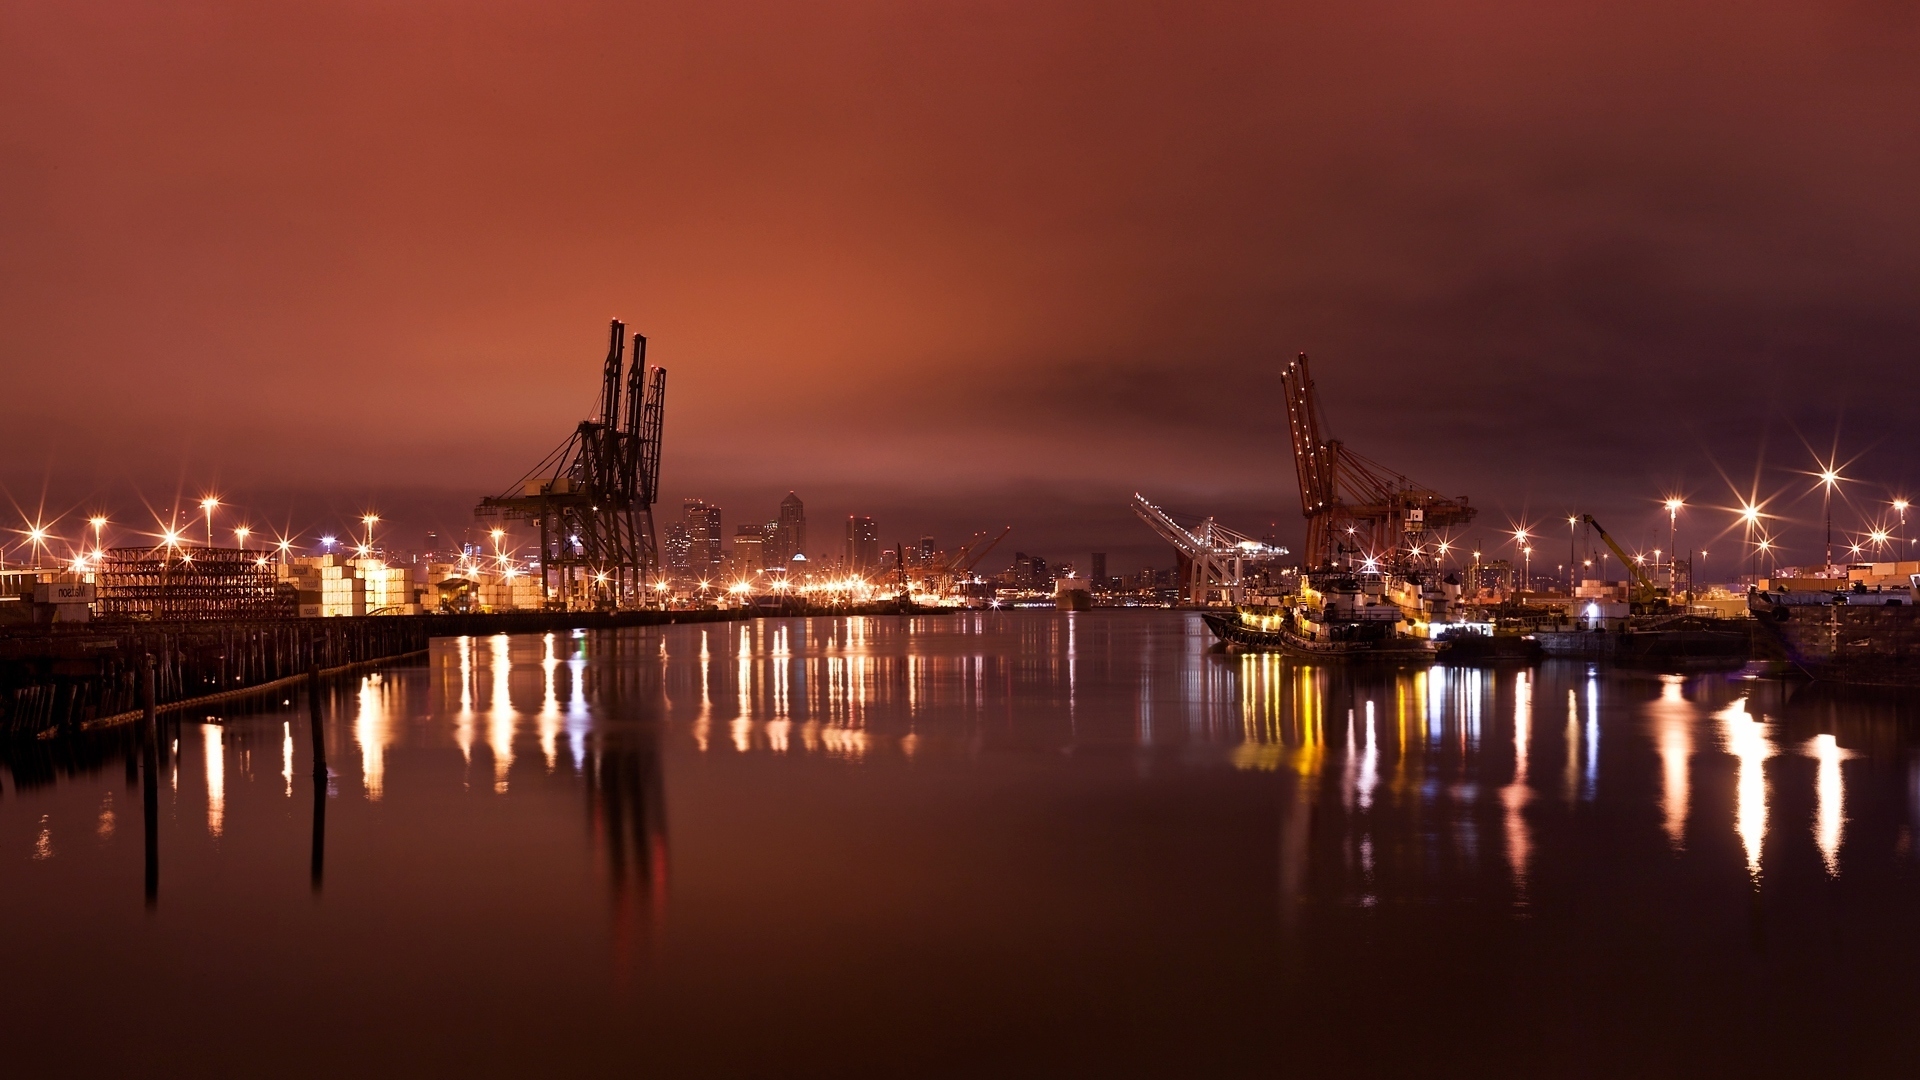 night, Lights, Port, Cranes, Tower, Photography, Water, Watertway, Reflection, Rivers, Places, Shine, Skies, Clouds, Cloudy Wallpaper